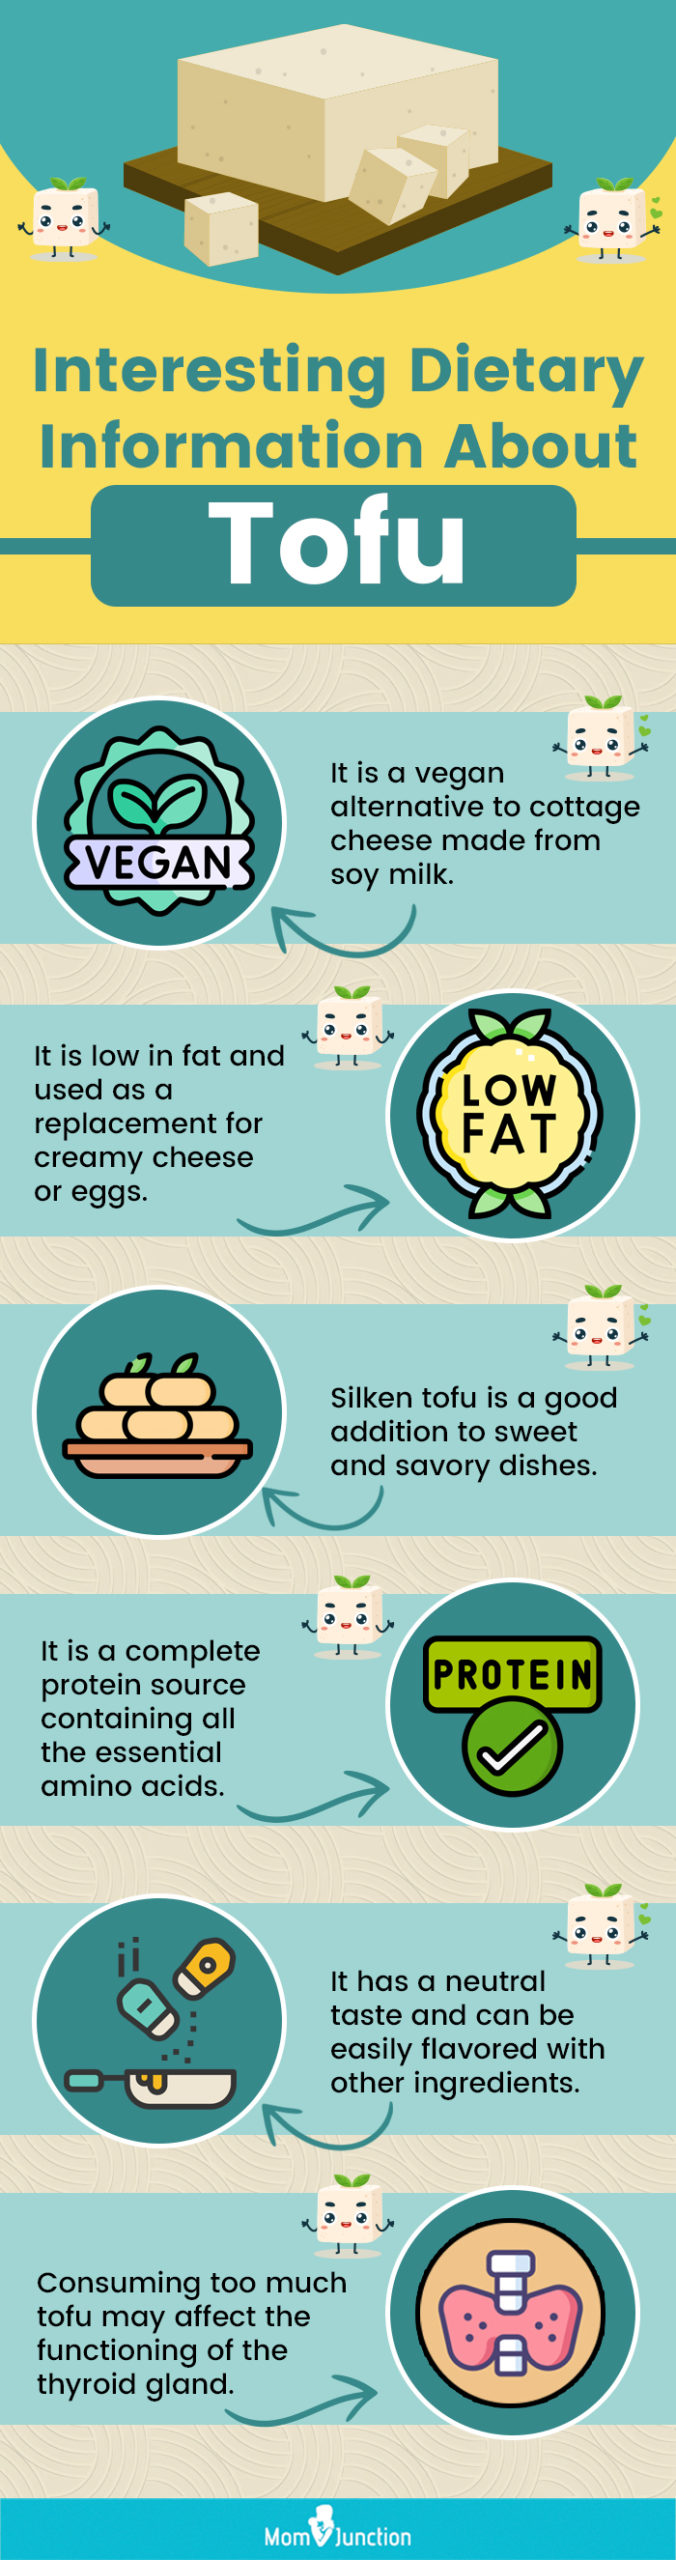 interesting dietary information about tofu (infographic)